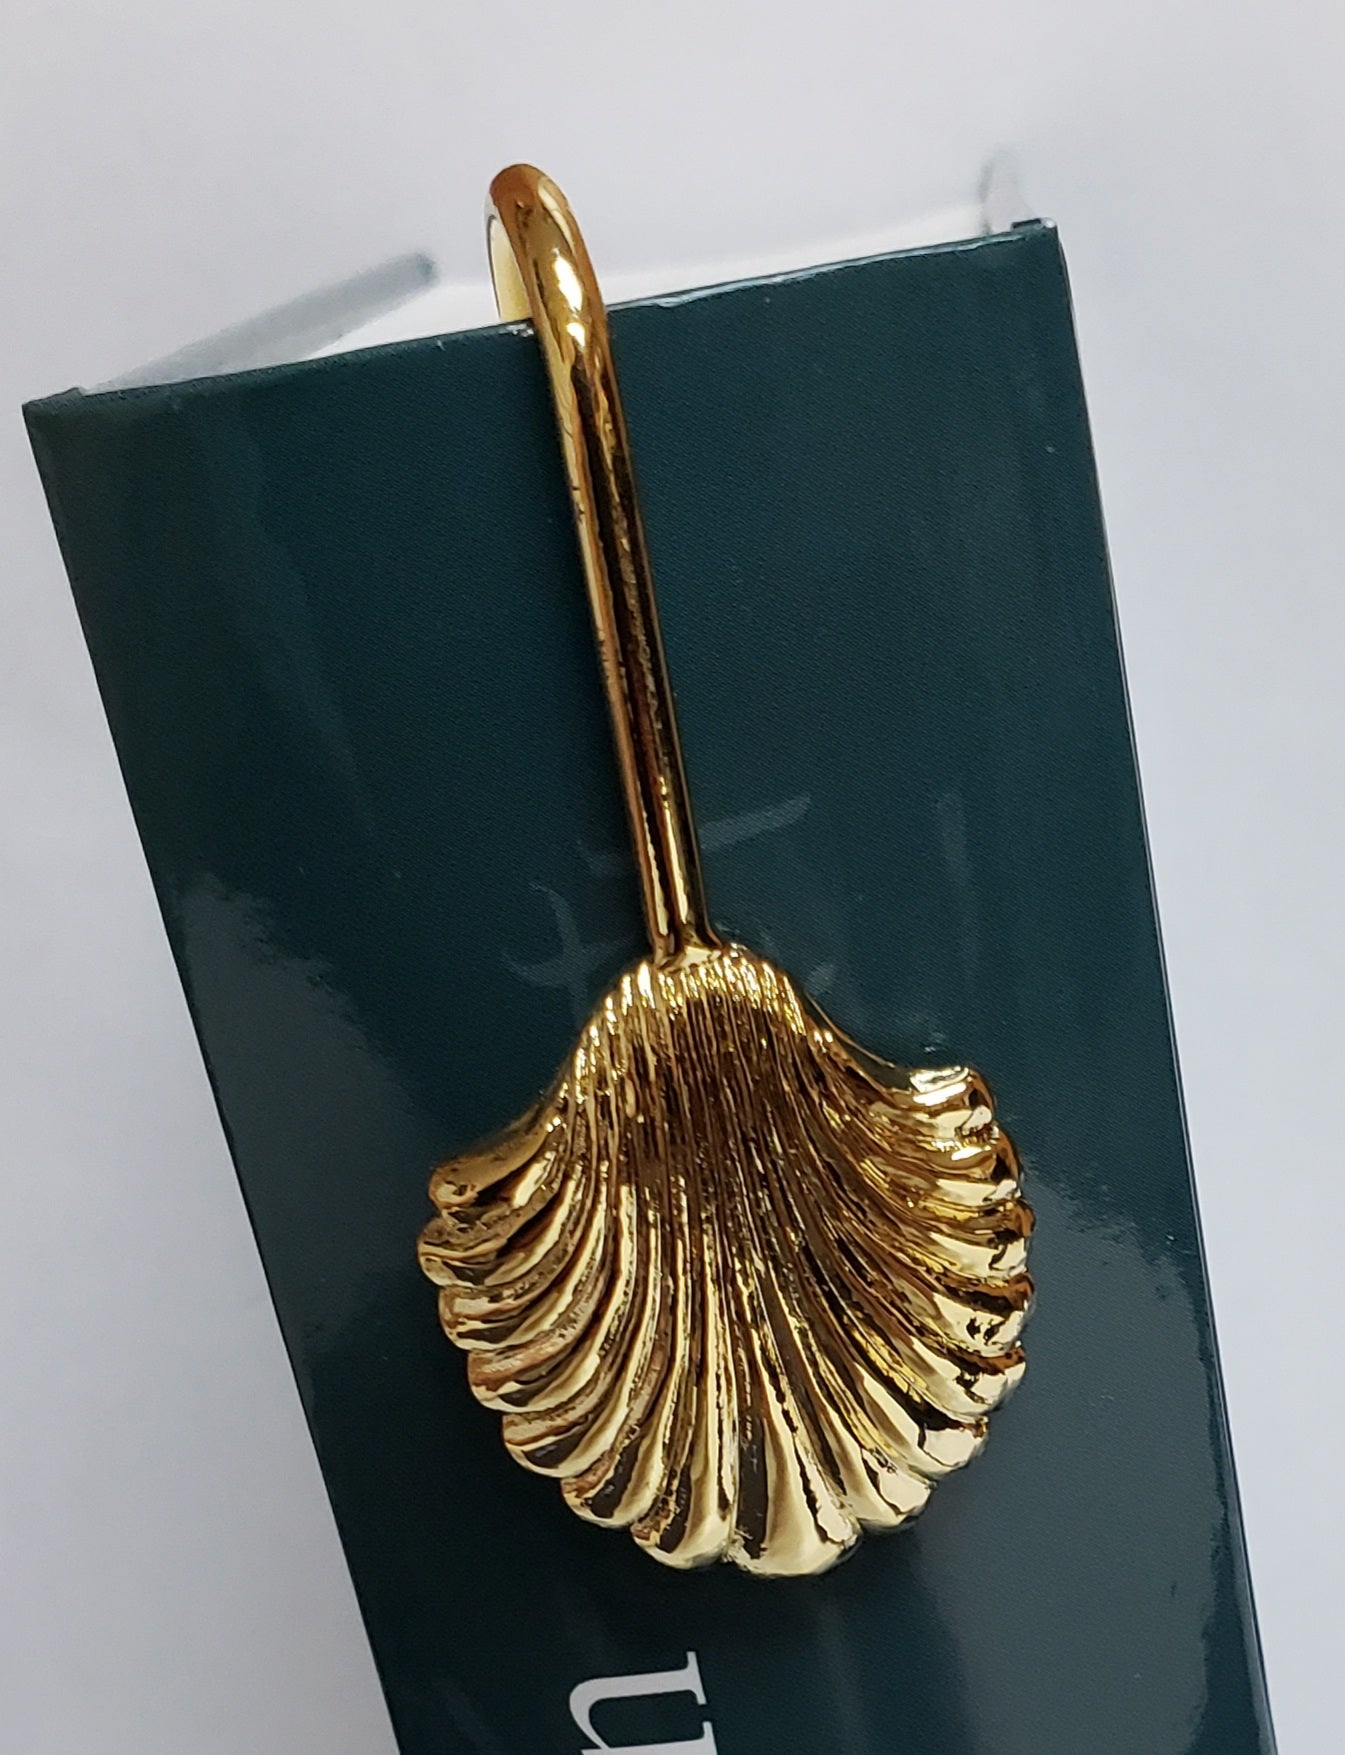 Mark the Place Brass Bookmark with Decorative Shell